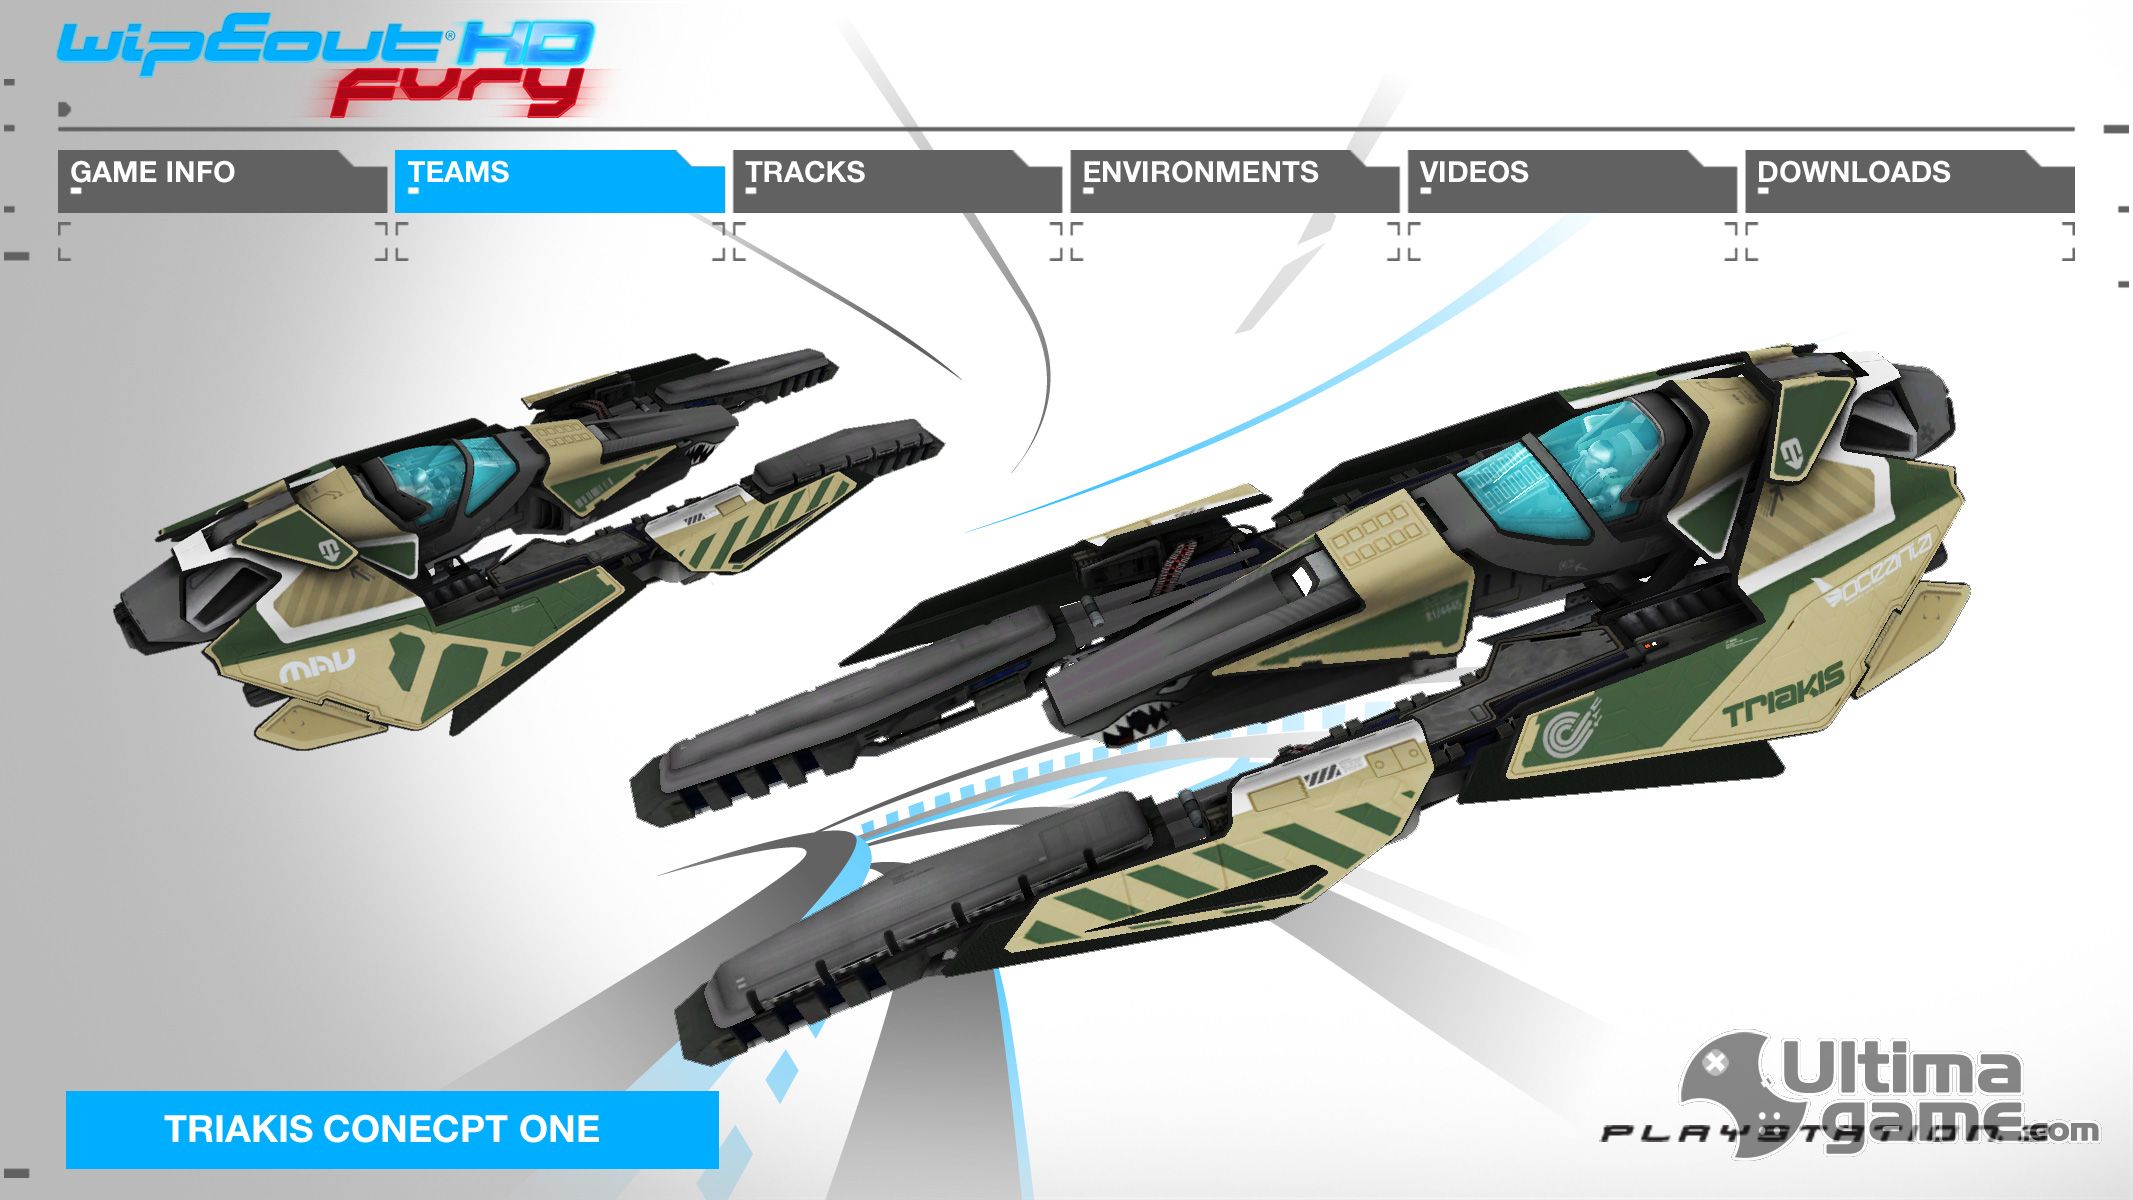 wipeout hd fury fx pack